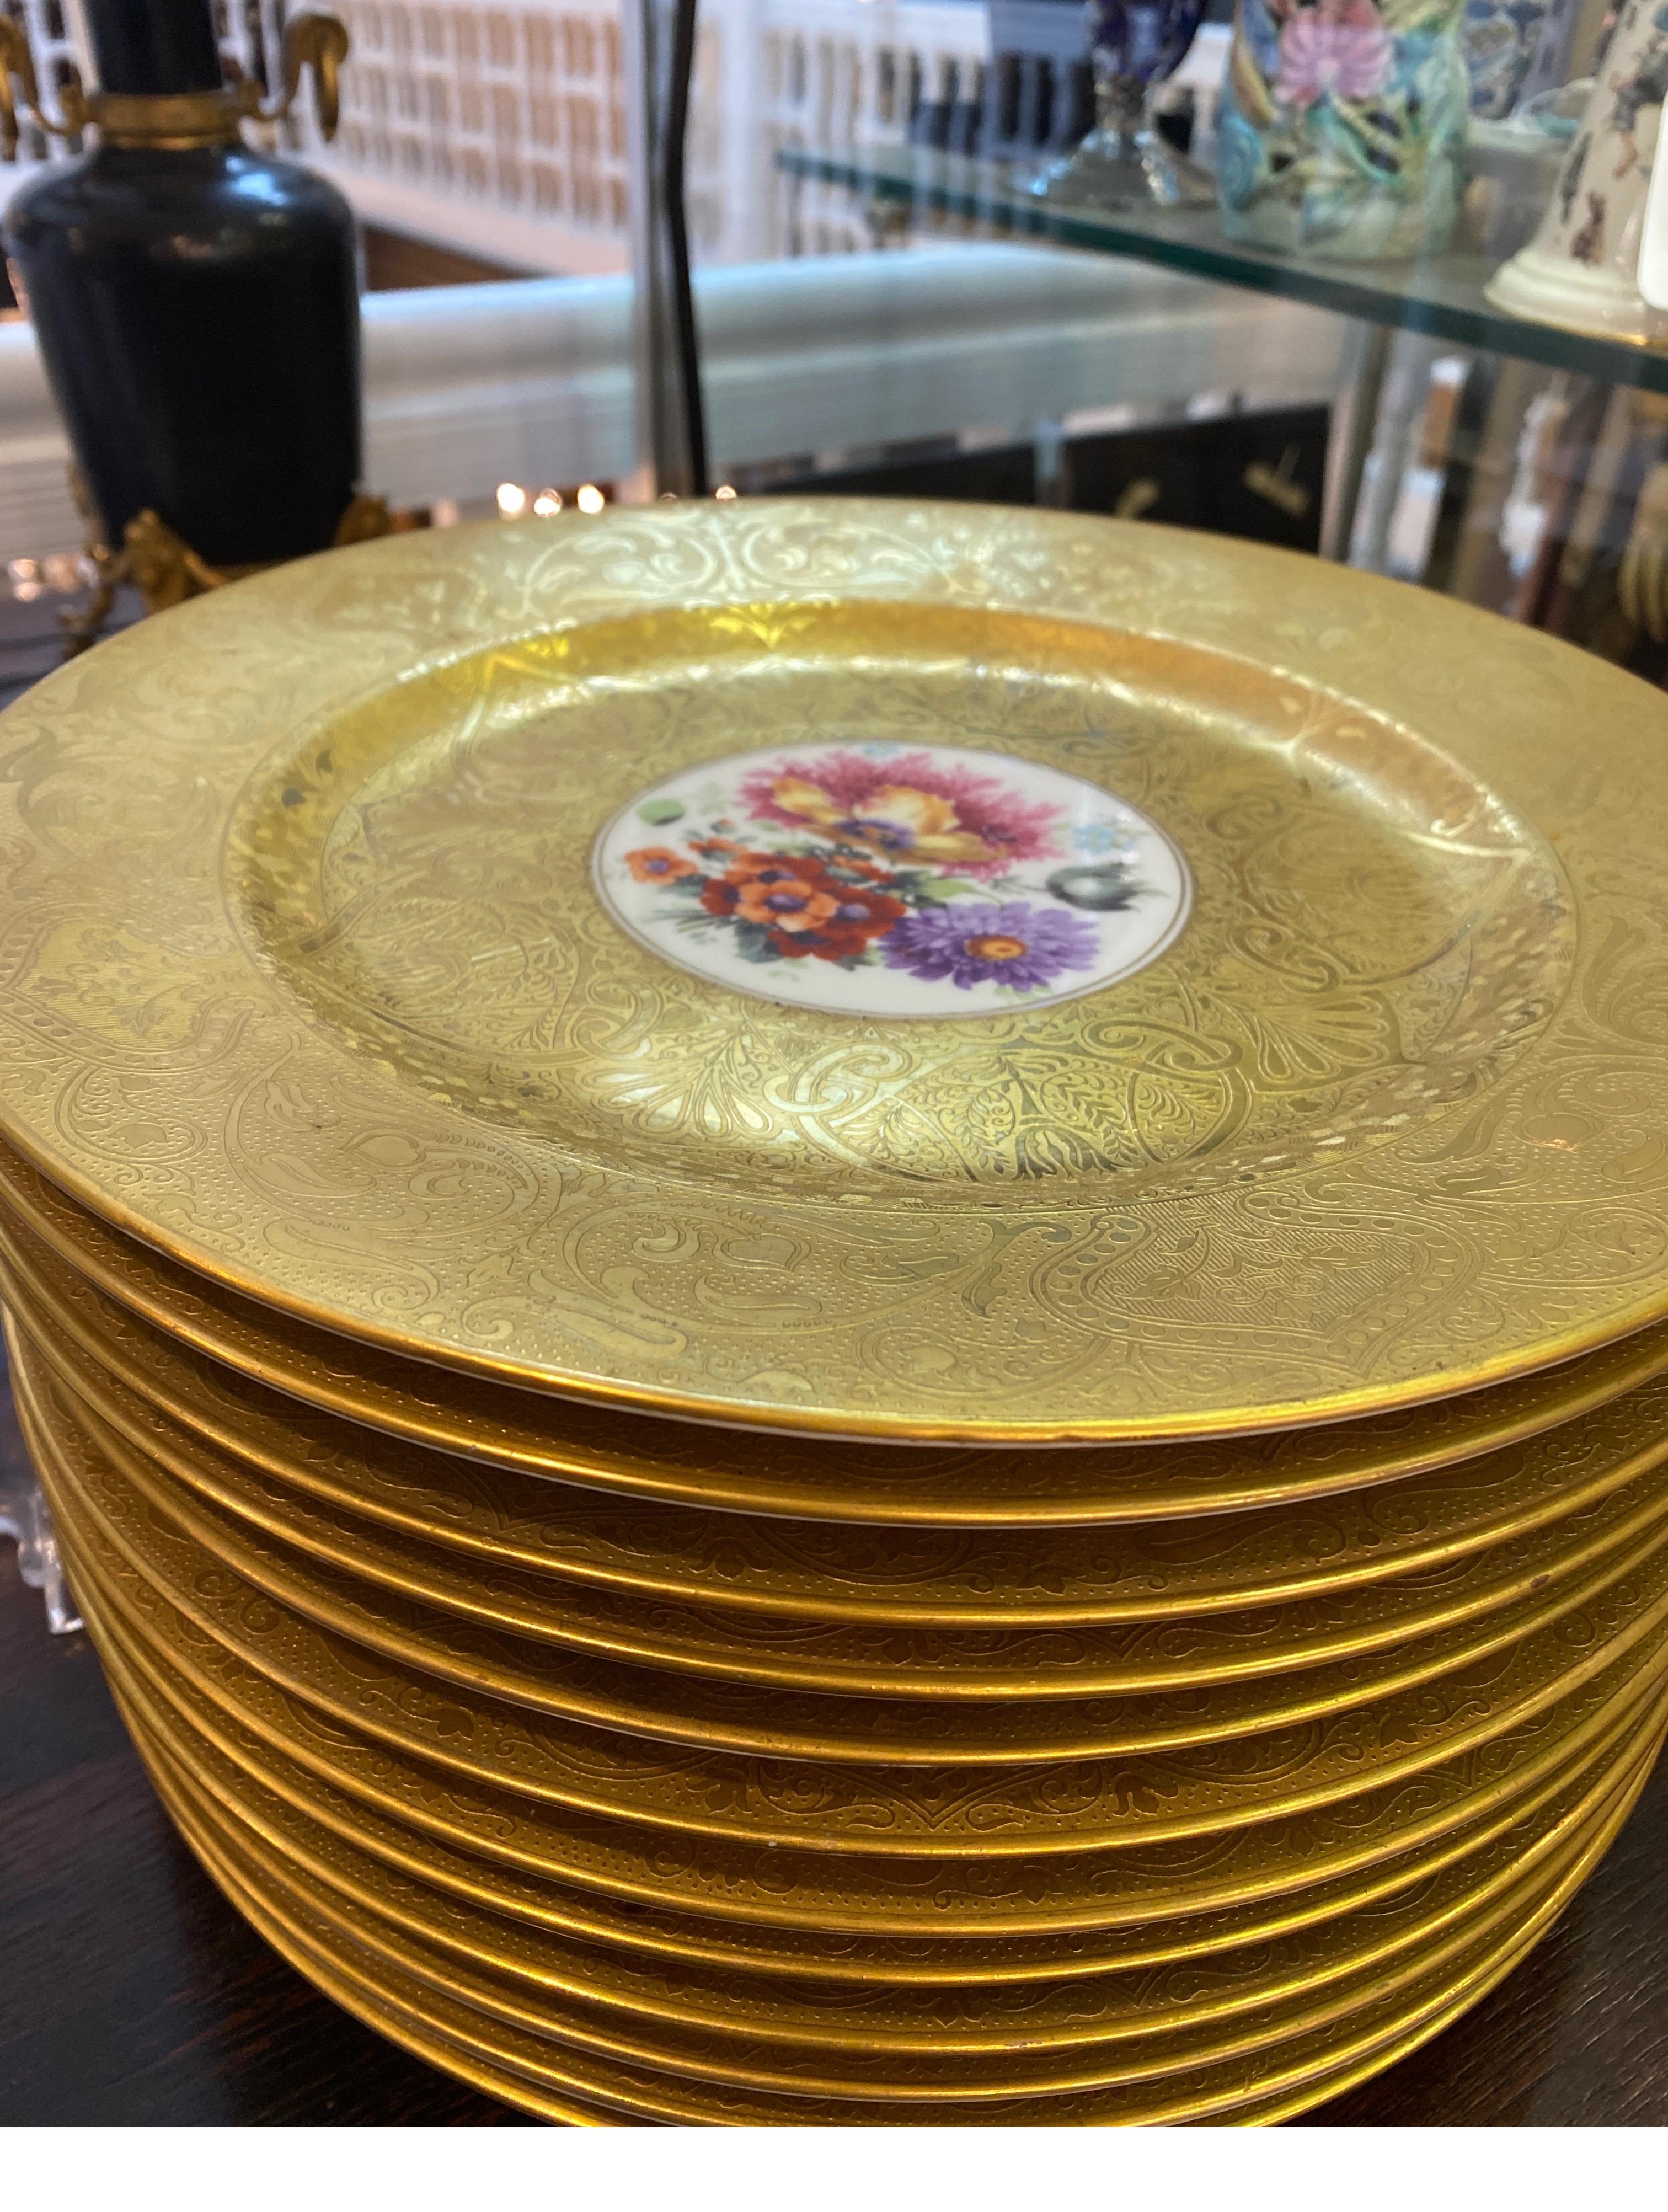 Early 20th Century An opulent set of 12 gold encrusted floral service plates